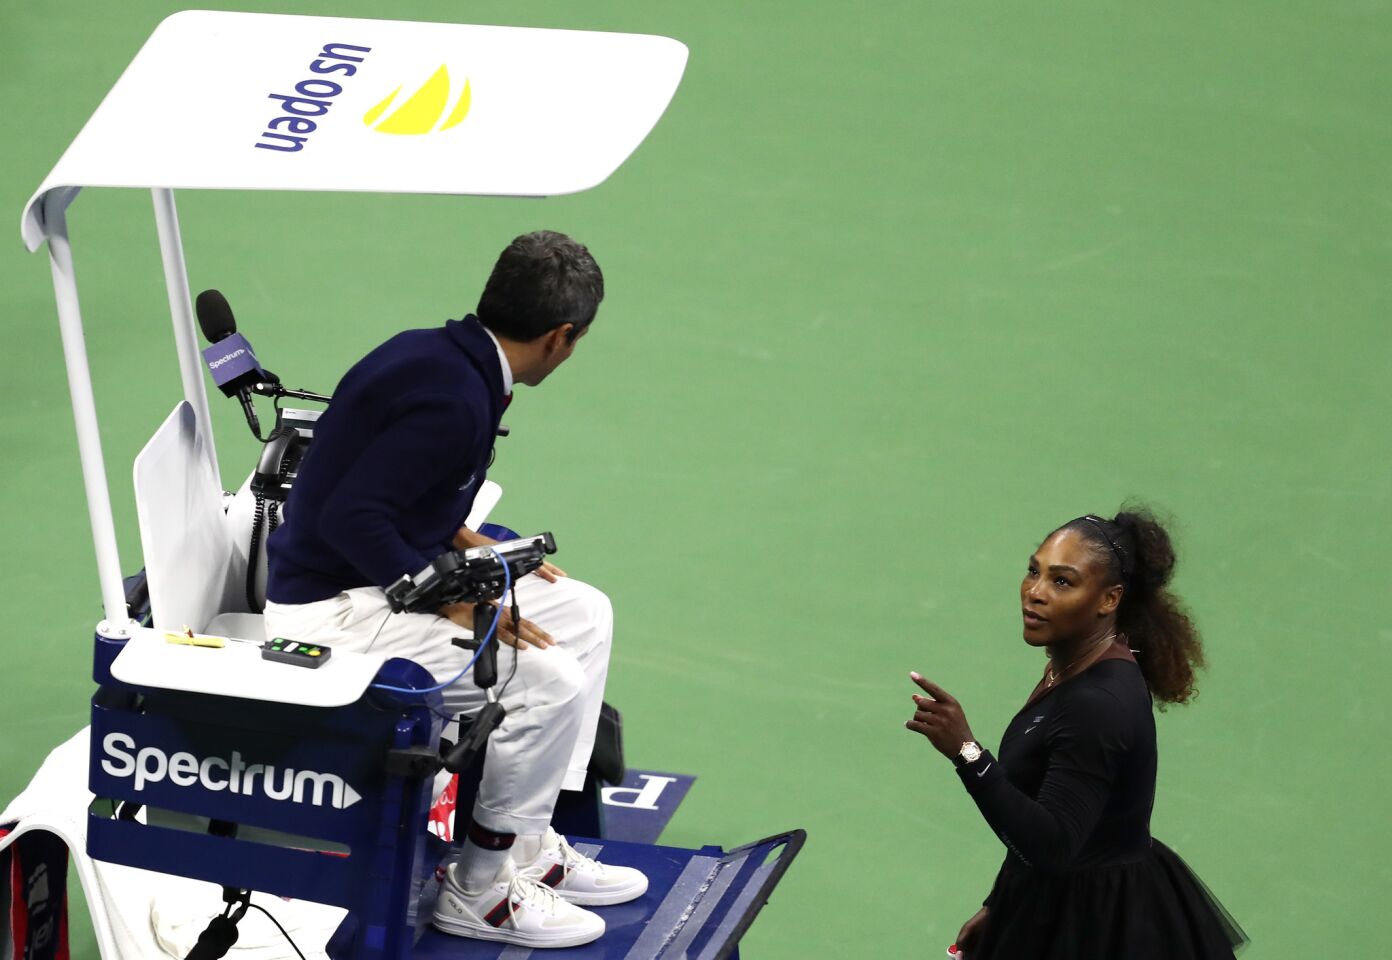 NEW YORK, NY - SEPTEMBER 08: Serena Williams of the United States reacts to umpire Carlos Ramos after her defeat in the Women's Singles finals match to Naomi Osaka of Japan on Day Thirteen of the 2018 US Open at the USTA Billie Jean King National Tennis Center on September 8, 2018 in the Flushing neighborhood of the Queens borough of New York City. (Photo by Al Bello/Getty Images) ** OUTS - ELSENT, FPG, CM - OUTS * NM, PH, VA if sourced by CT, LA or MoD **